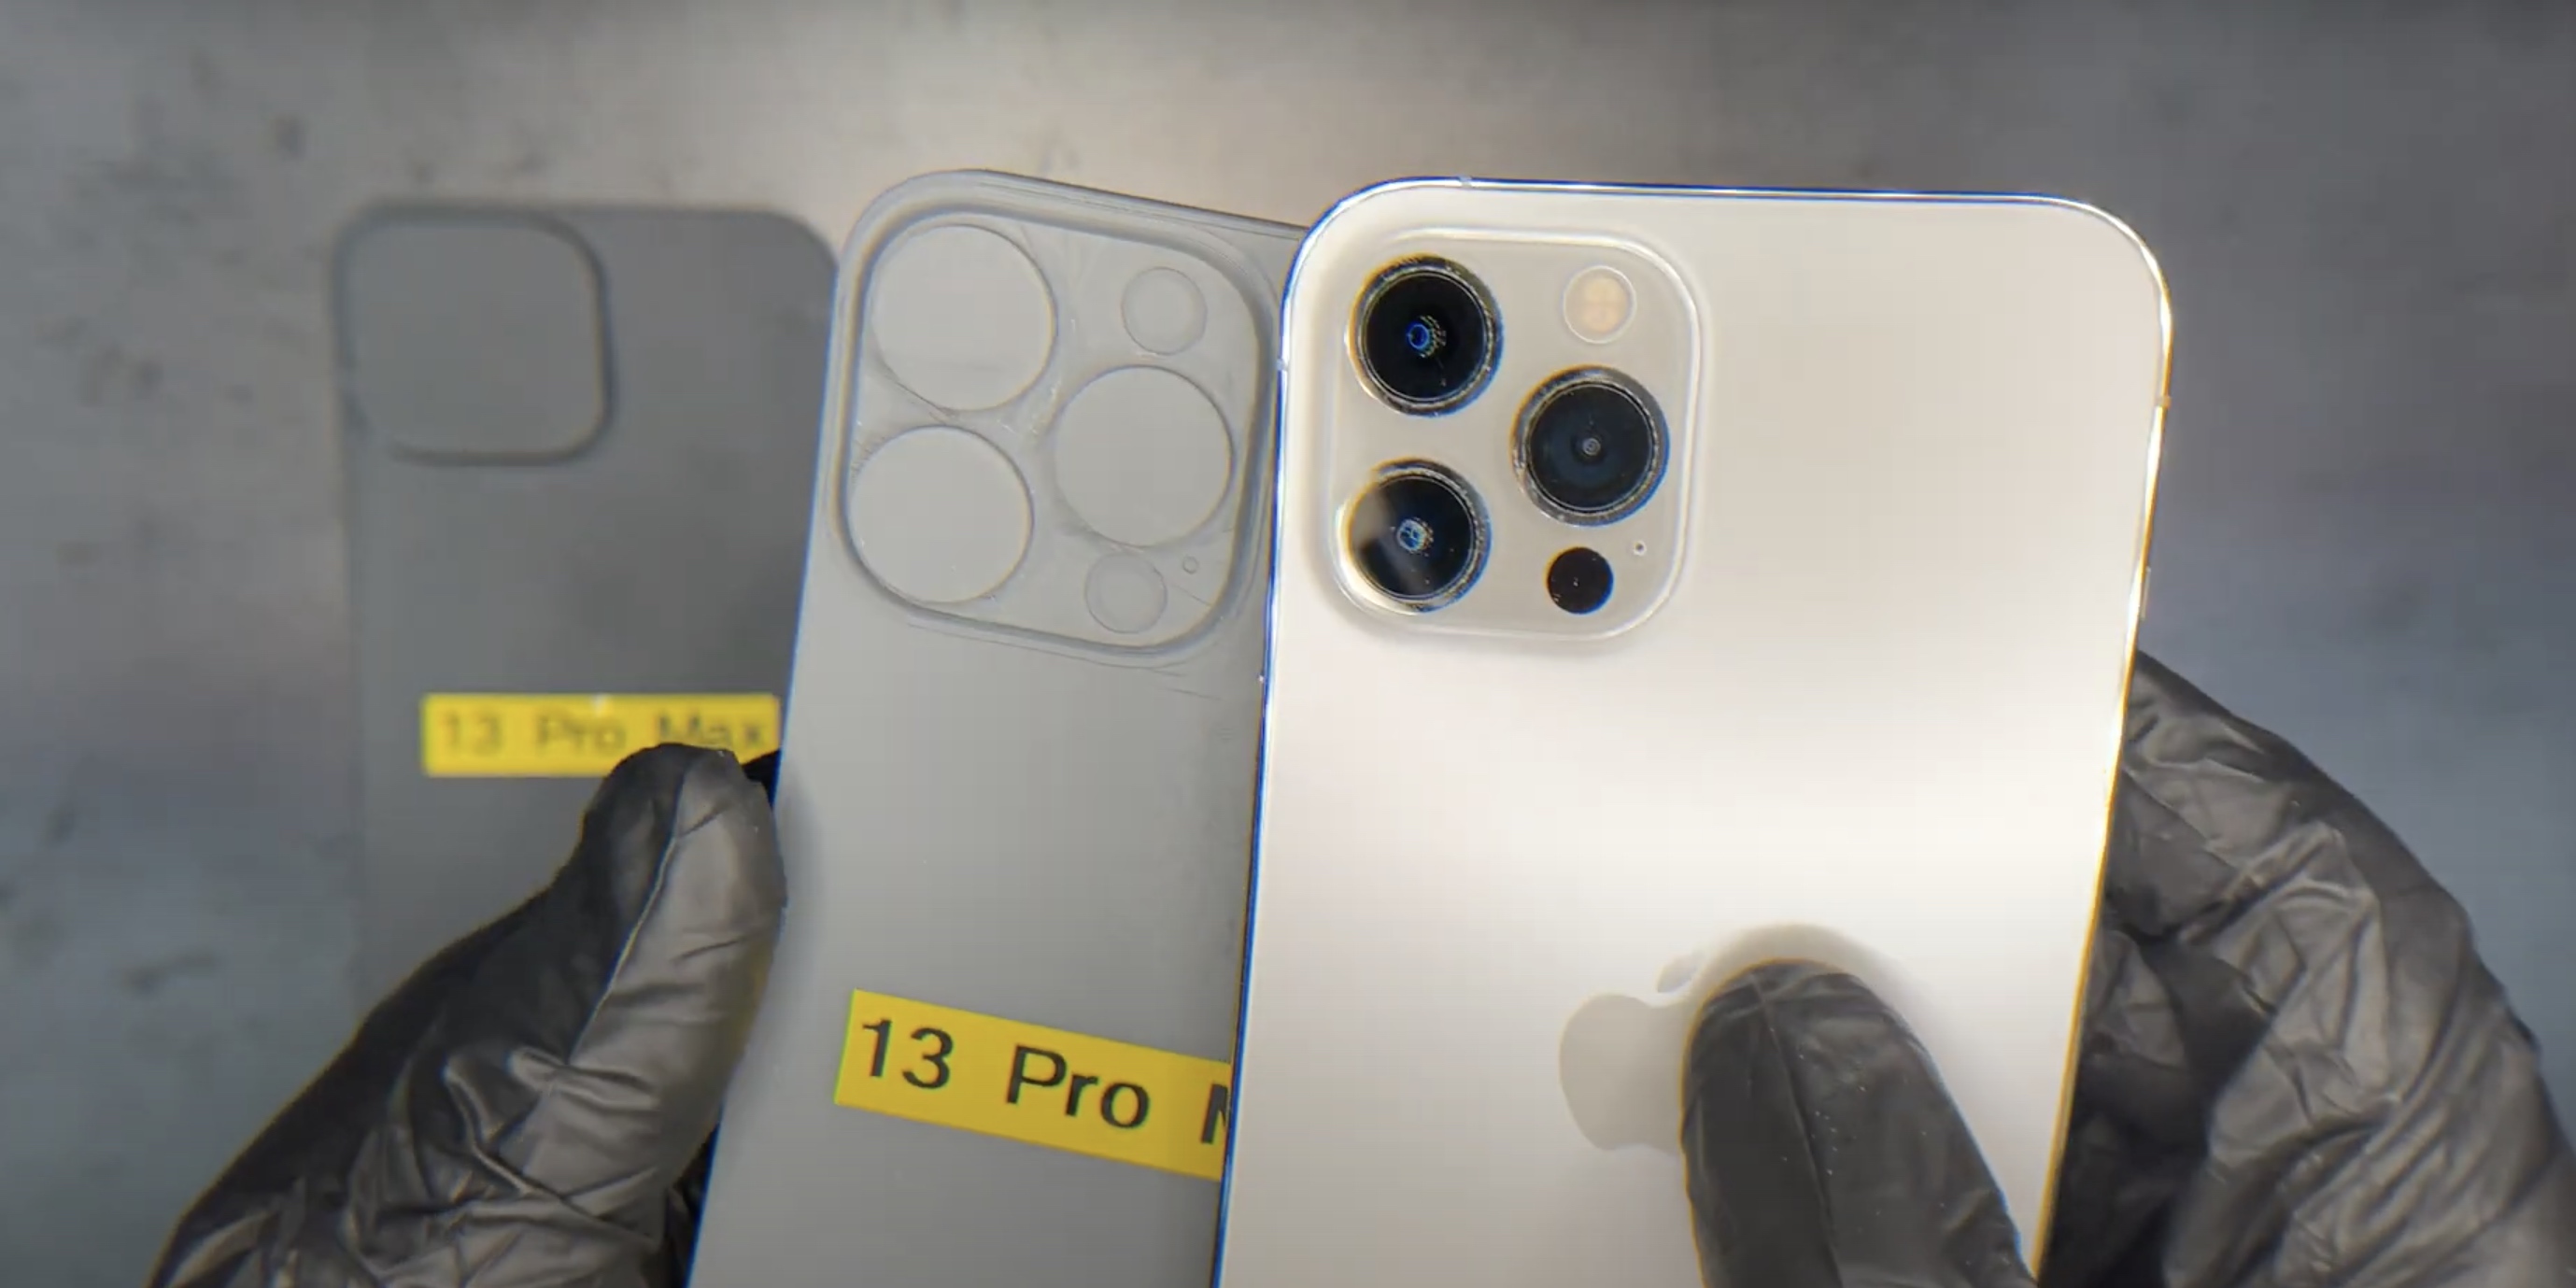 Leaked Schematics Show Significantly Larger Camera Lenses On Iphone 13 Pro Max 9to5mac